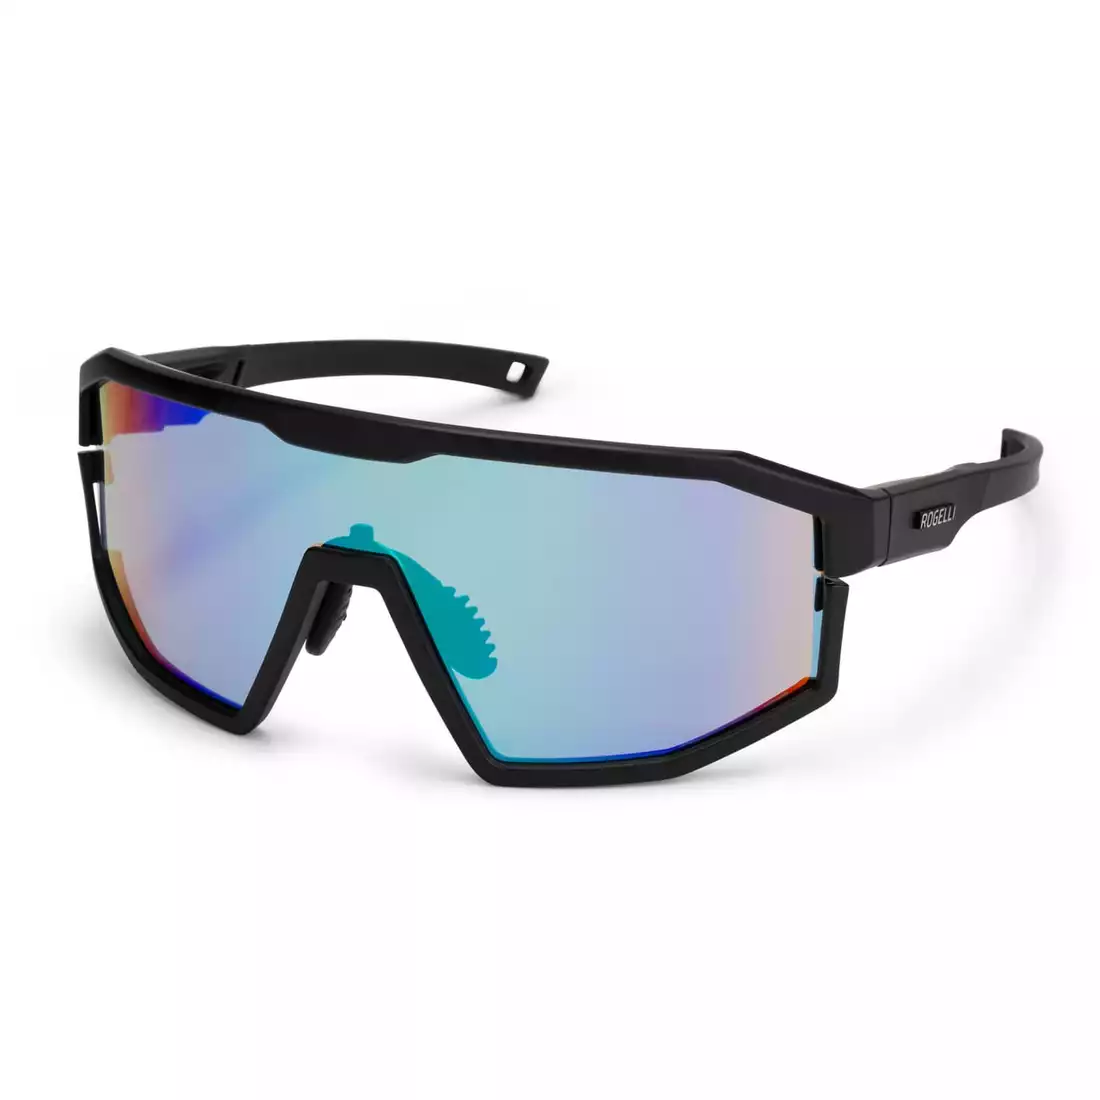 ROGELLI RECON Sports glasses with interchangeable lenses, black